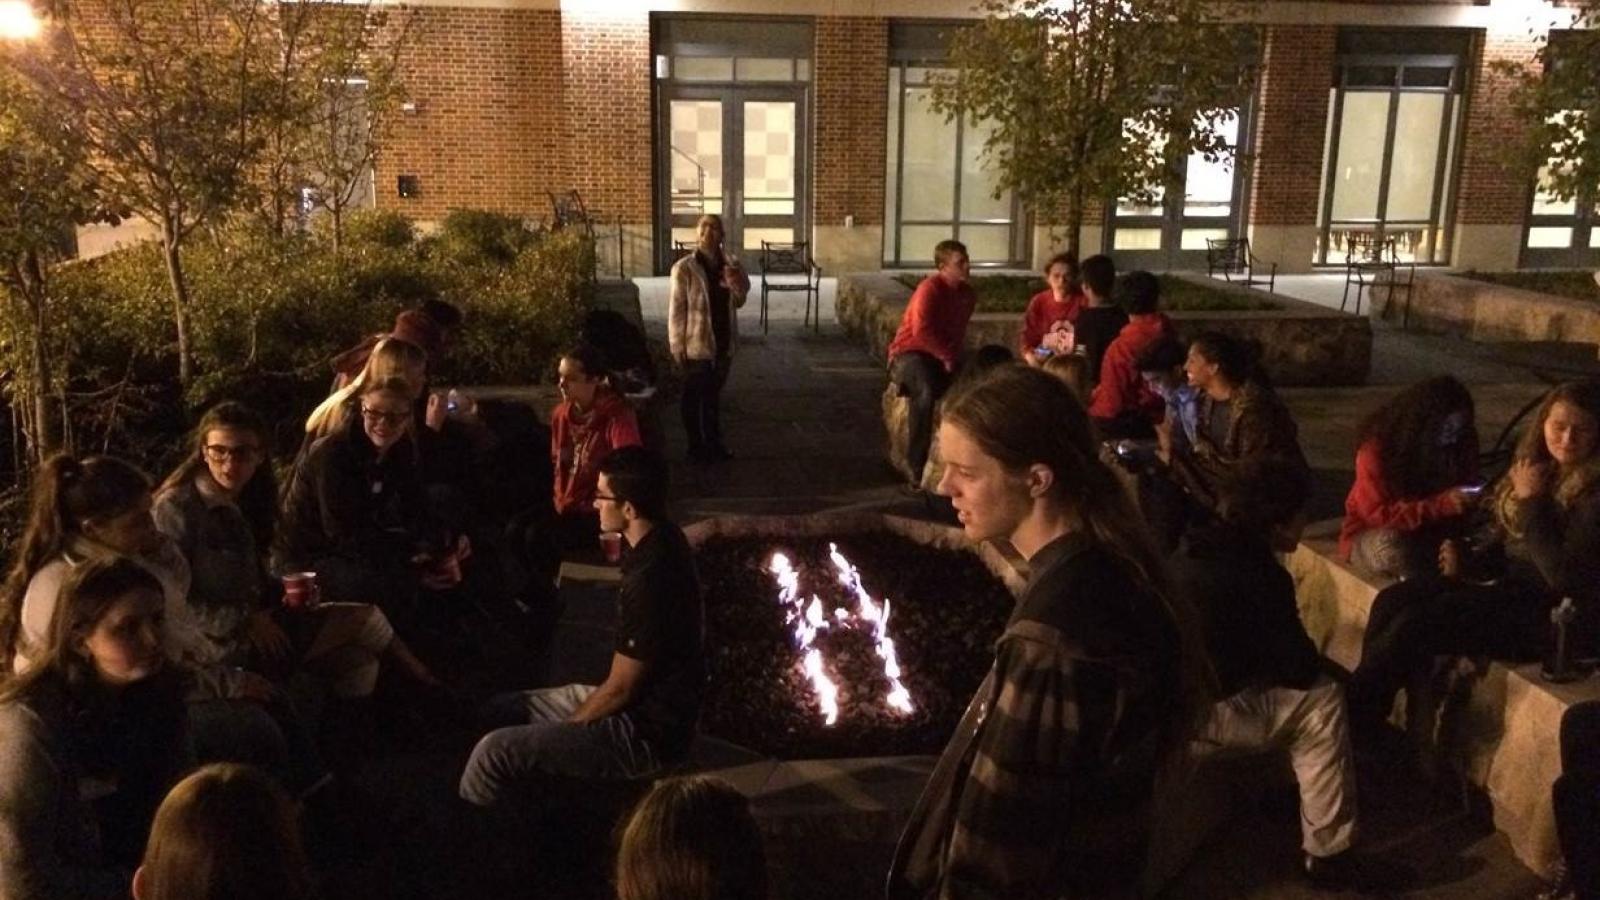 Bonfire fire pit with students